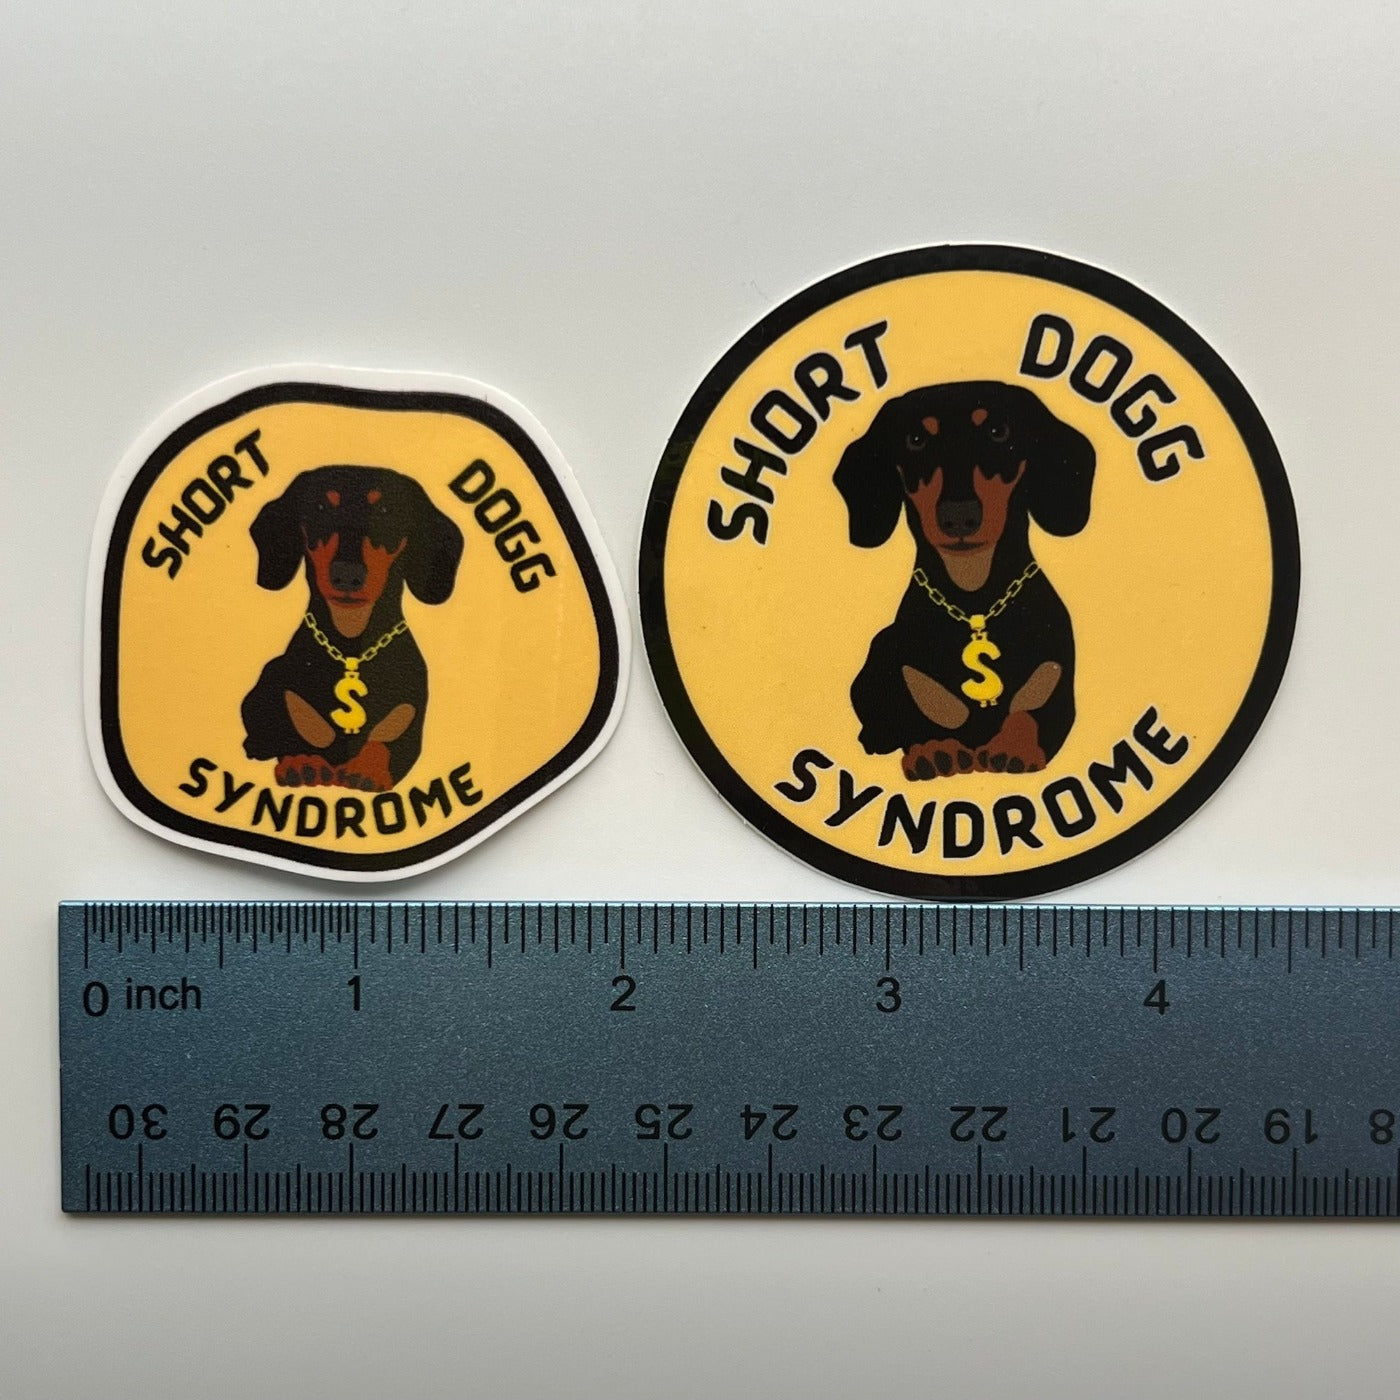 "Short Dogg Syndrome"  Funny Dachshund & Chihuahua Stickers